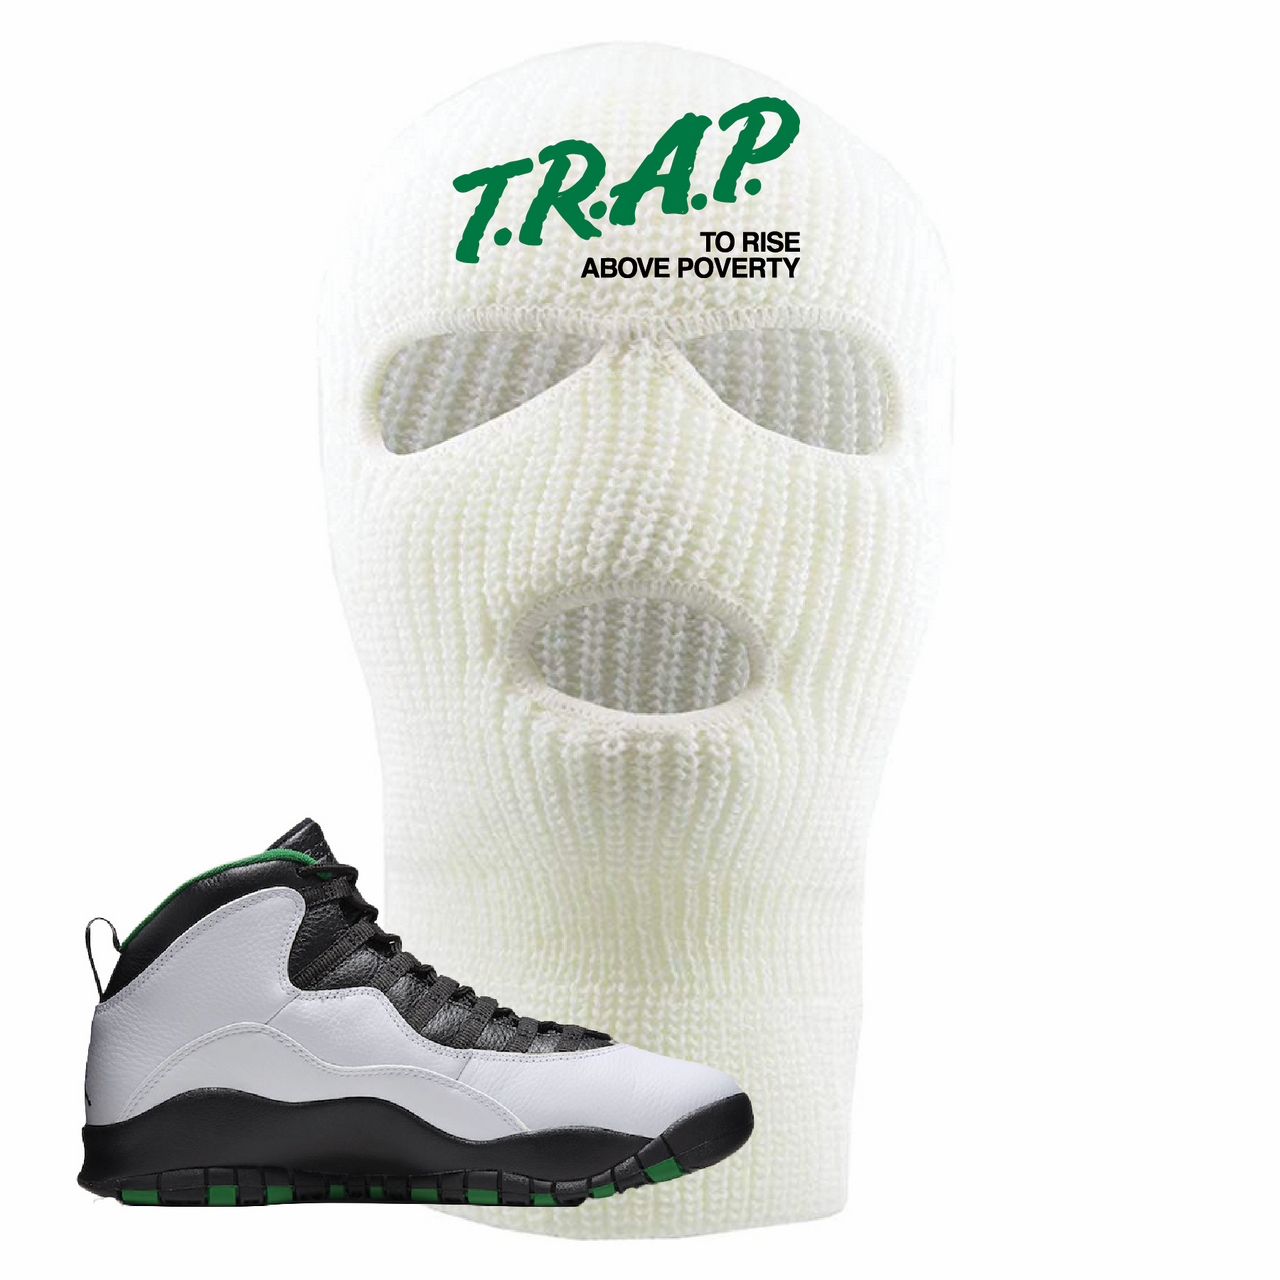 Air Jordan 10 Seattle SuperSonics Trap to Rise Above Poverty White Sneaker Matching Ski Mask